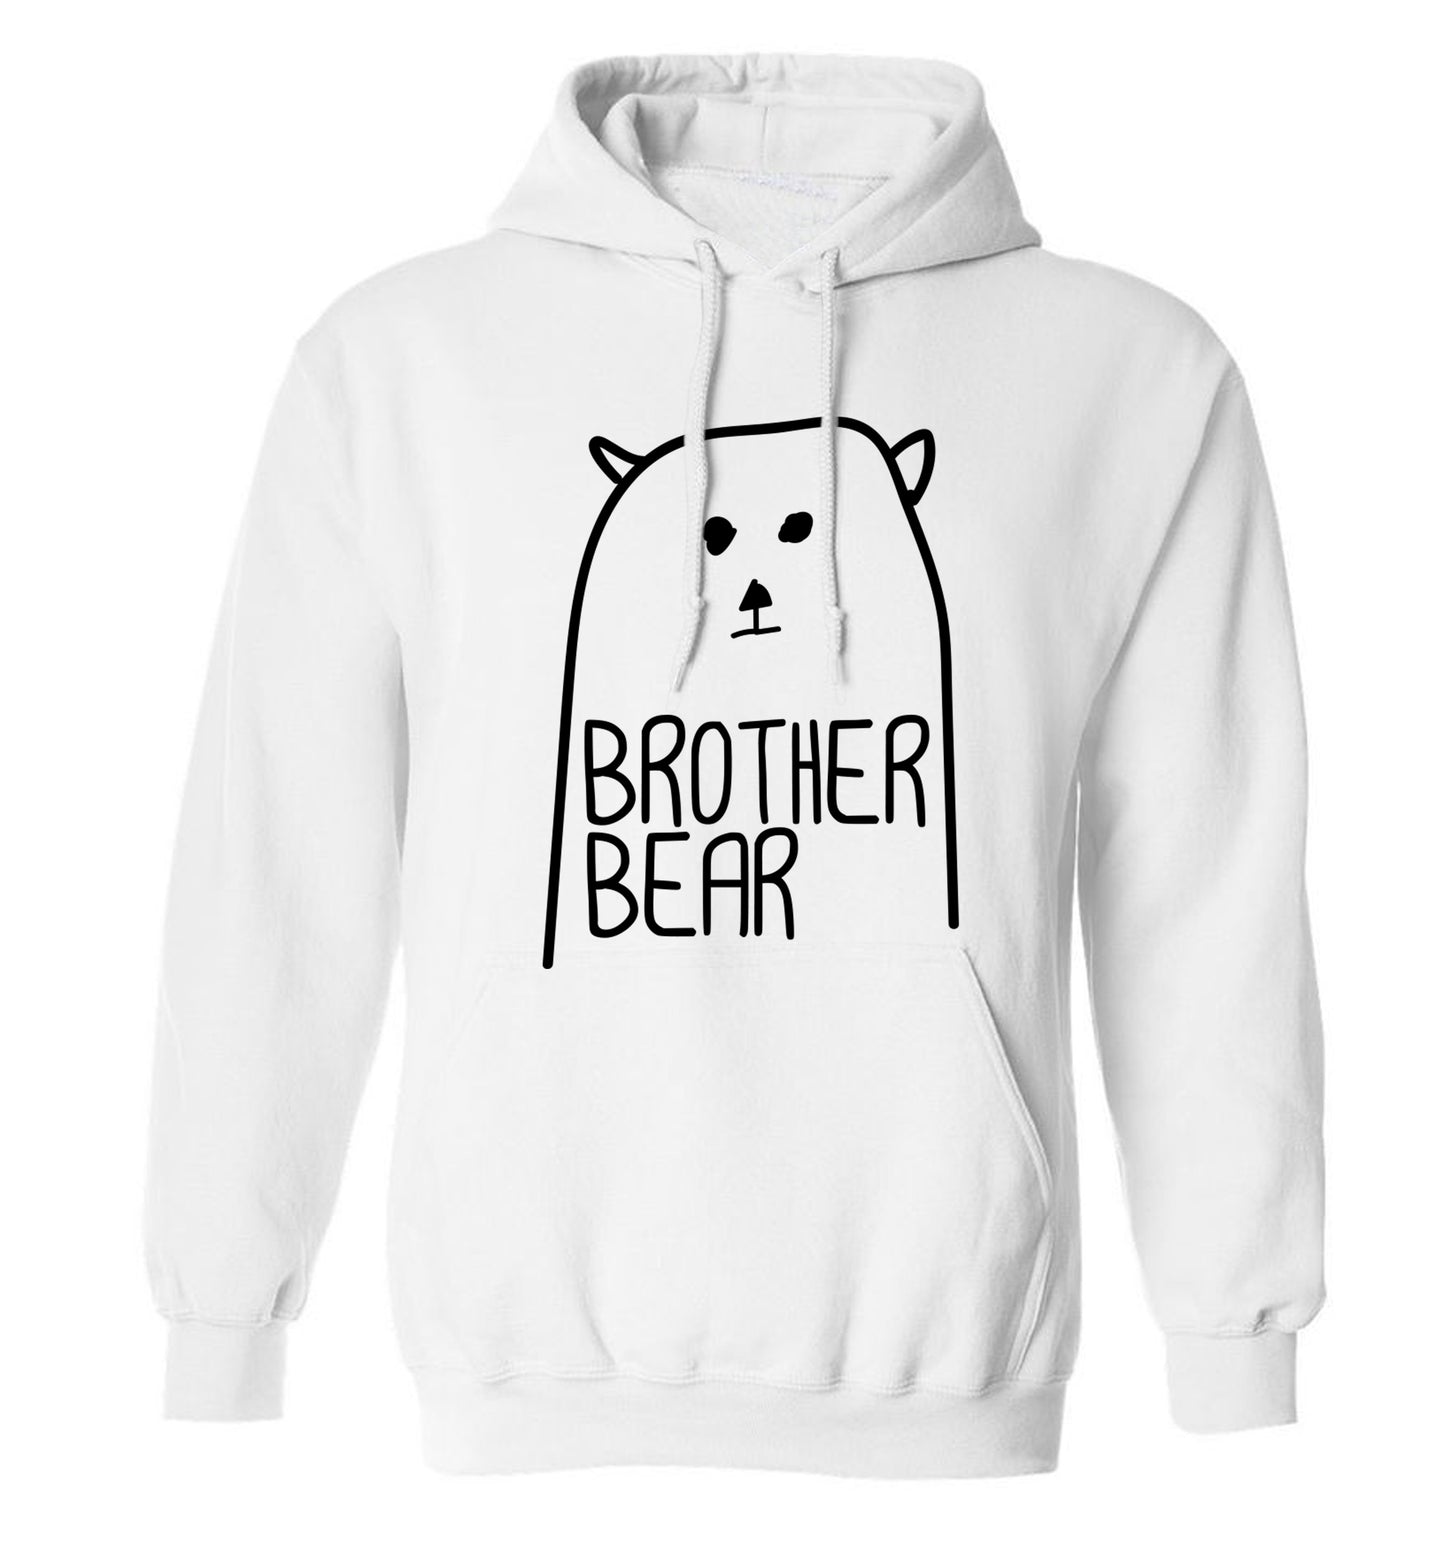 Brother bear adults unisex white hoodie 2XL